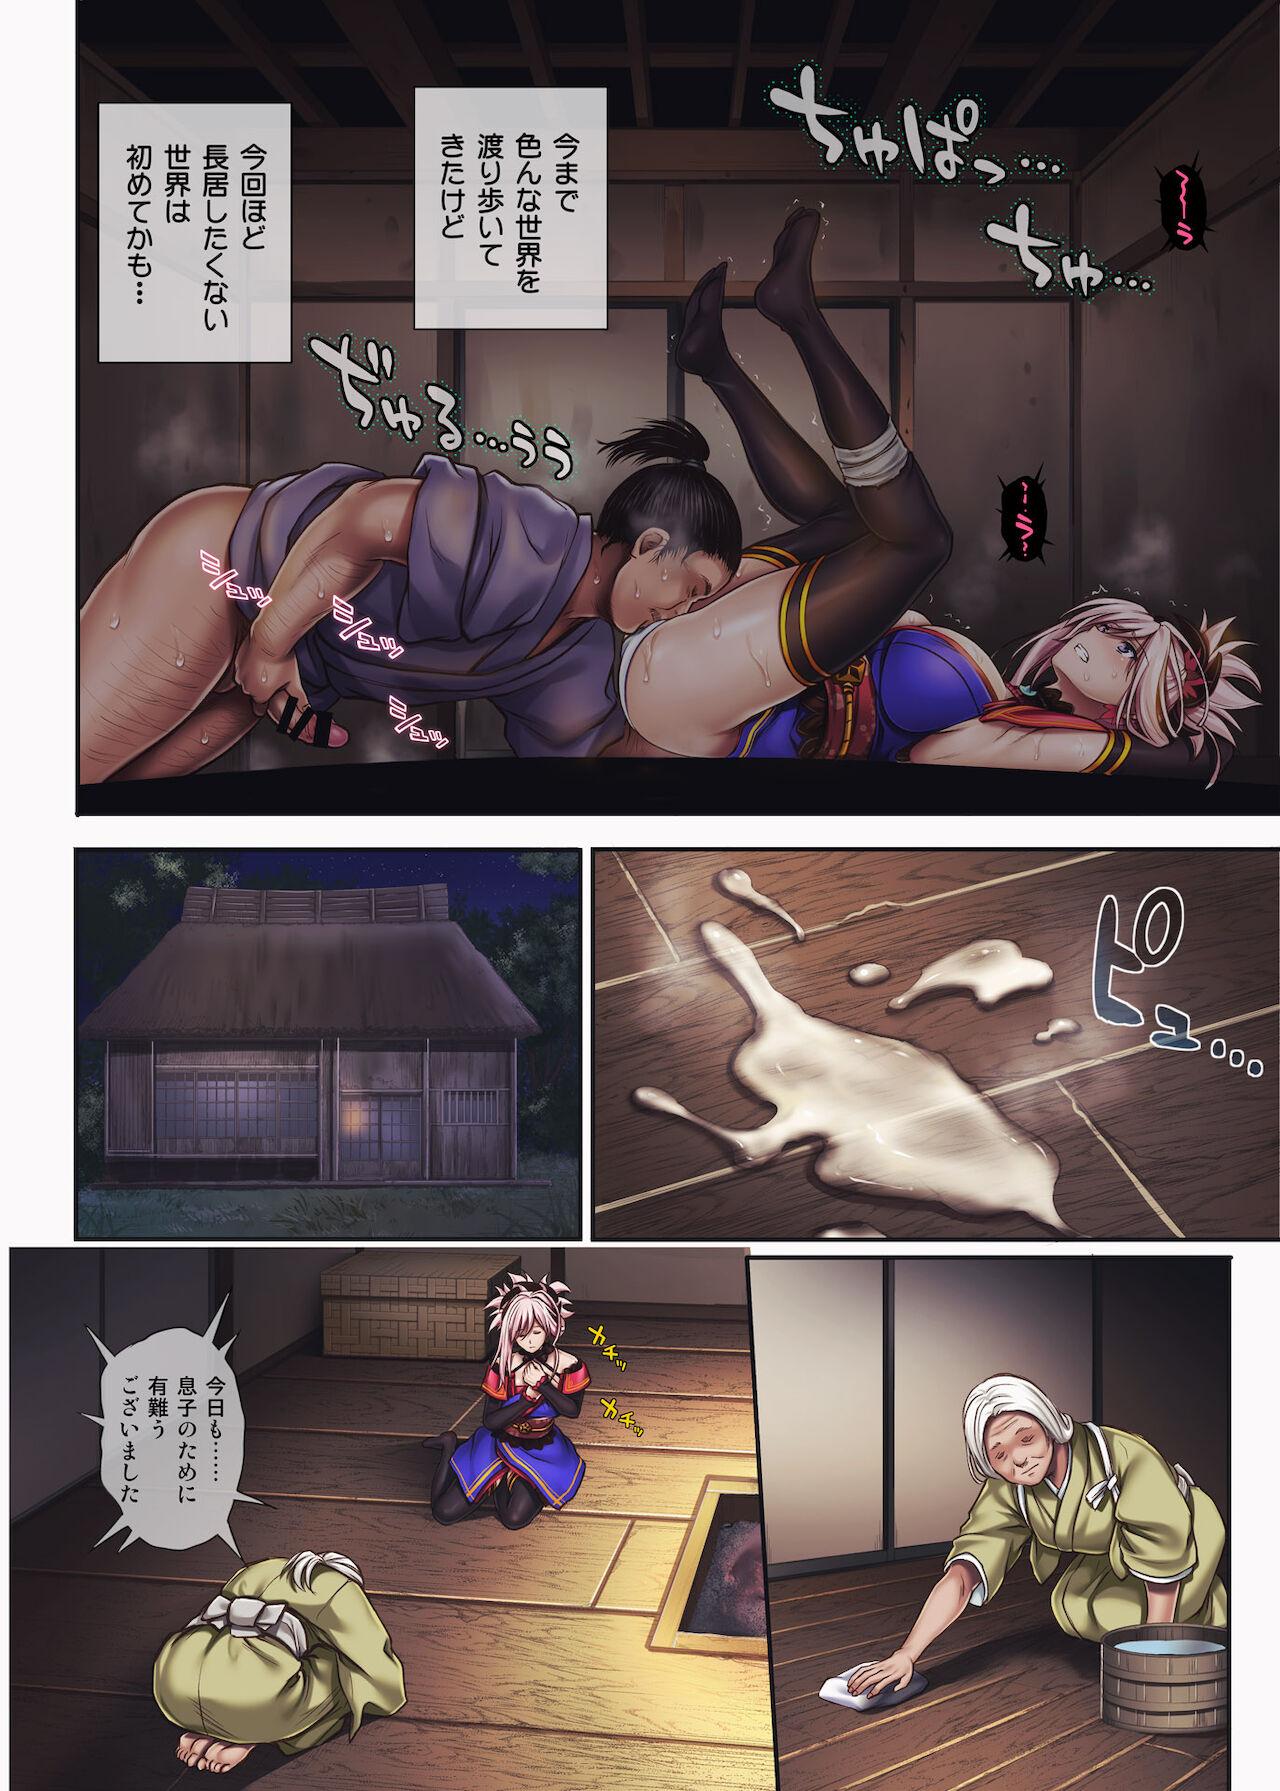 Pinoy Cyclone no Doujinshi Full Color Pack 4 - Fate grand order Asslick - Page 5